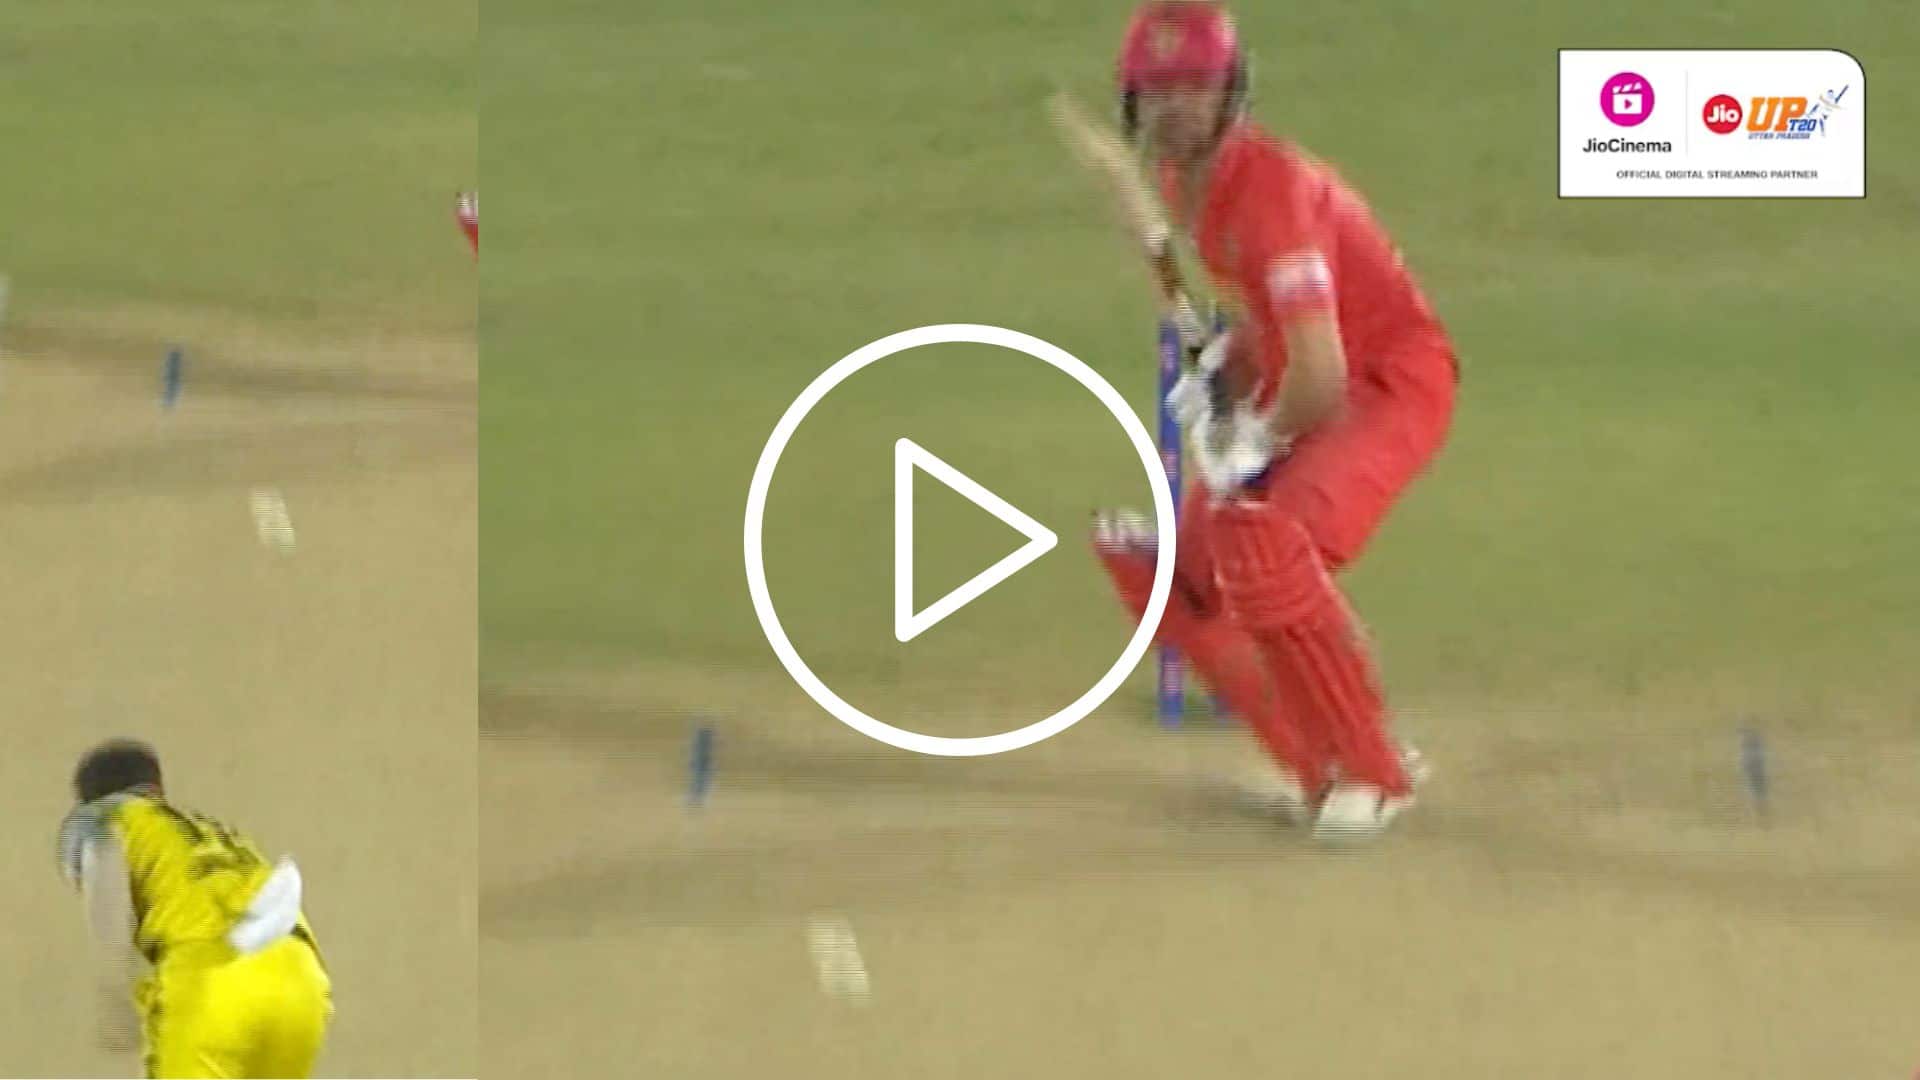 [Watch] Vintage Bhuvneshwar Kumar Knocks Over The Off Pole With Deadly Inswinger